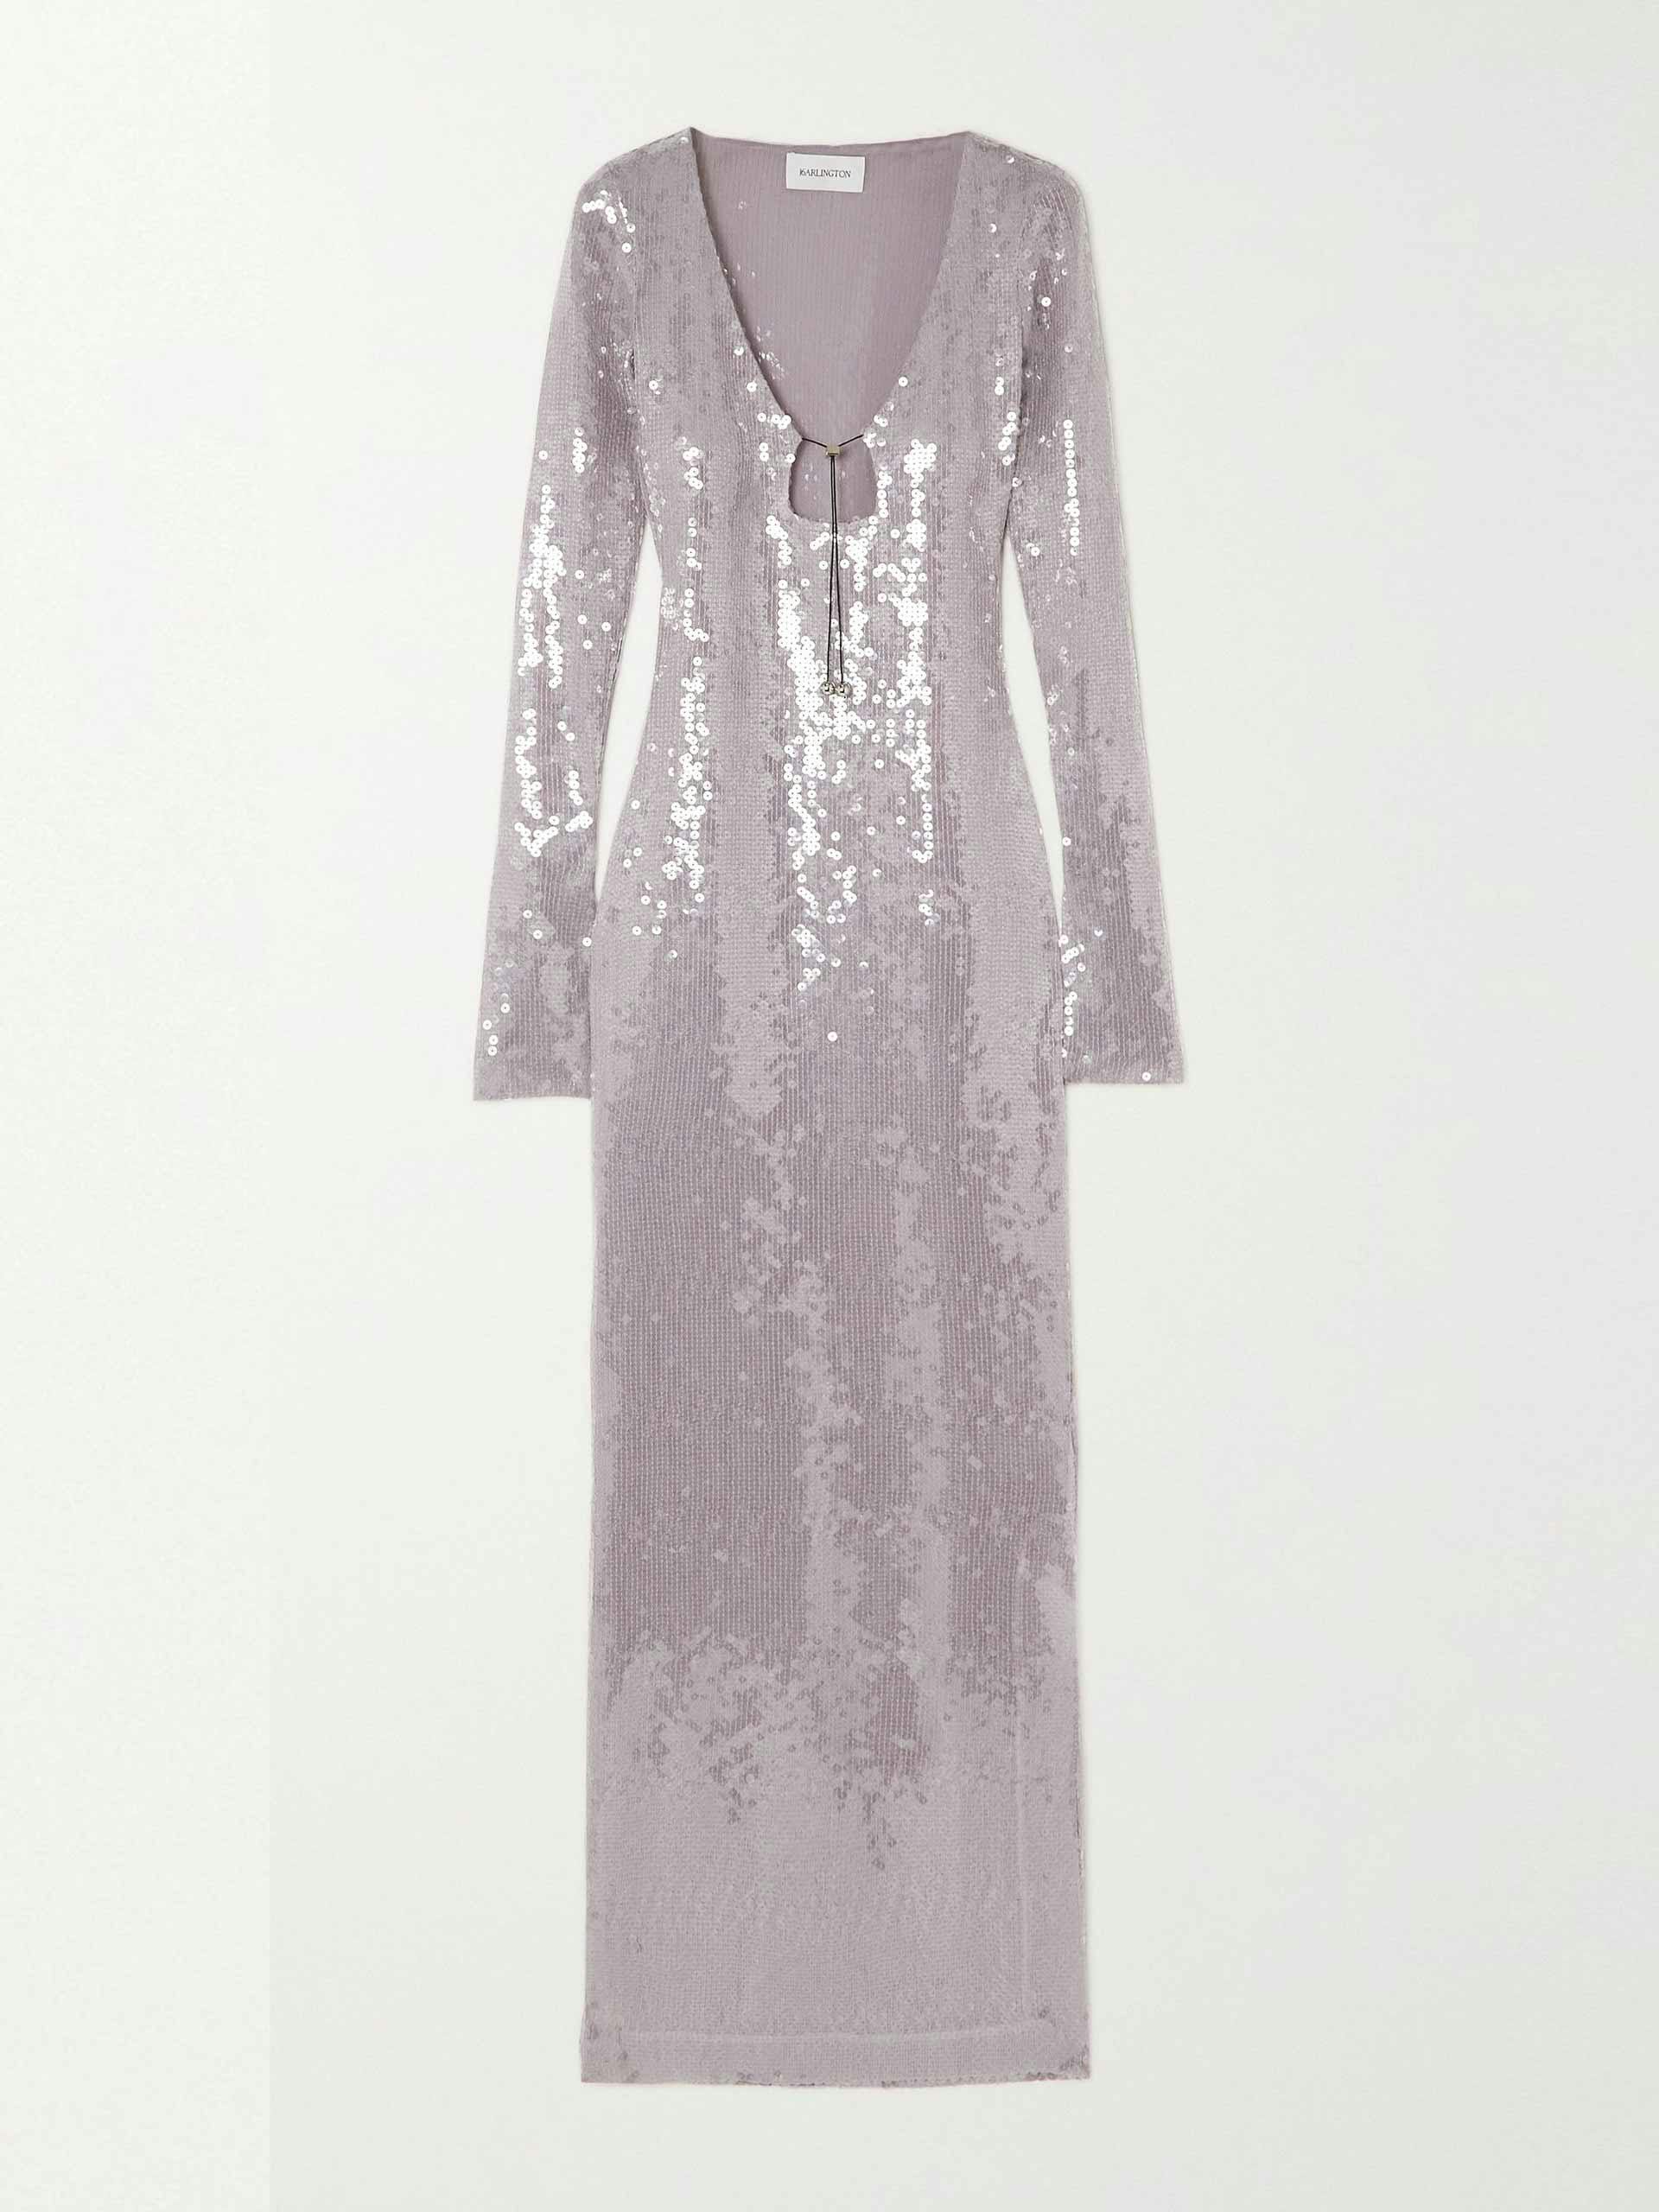 Lilac sequined dress